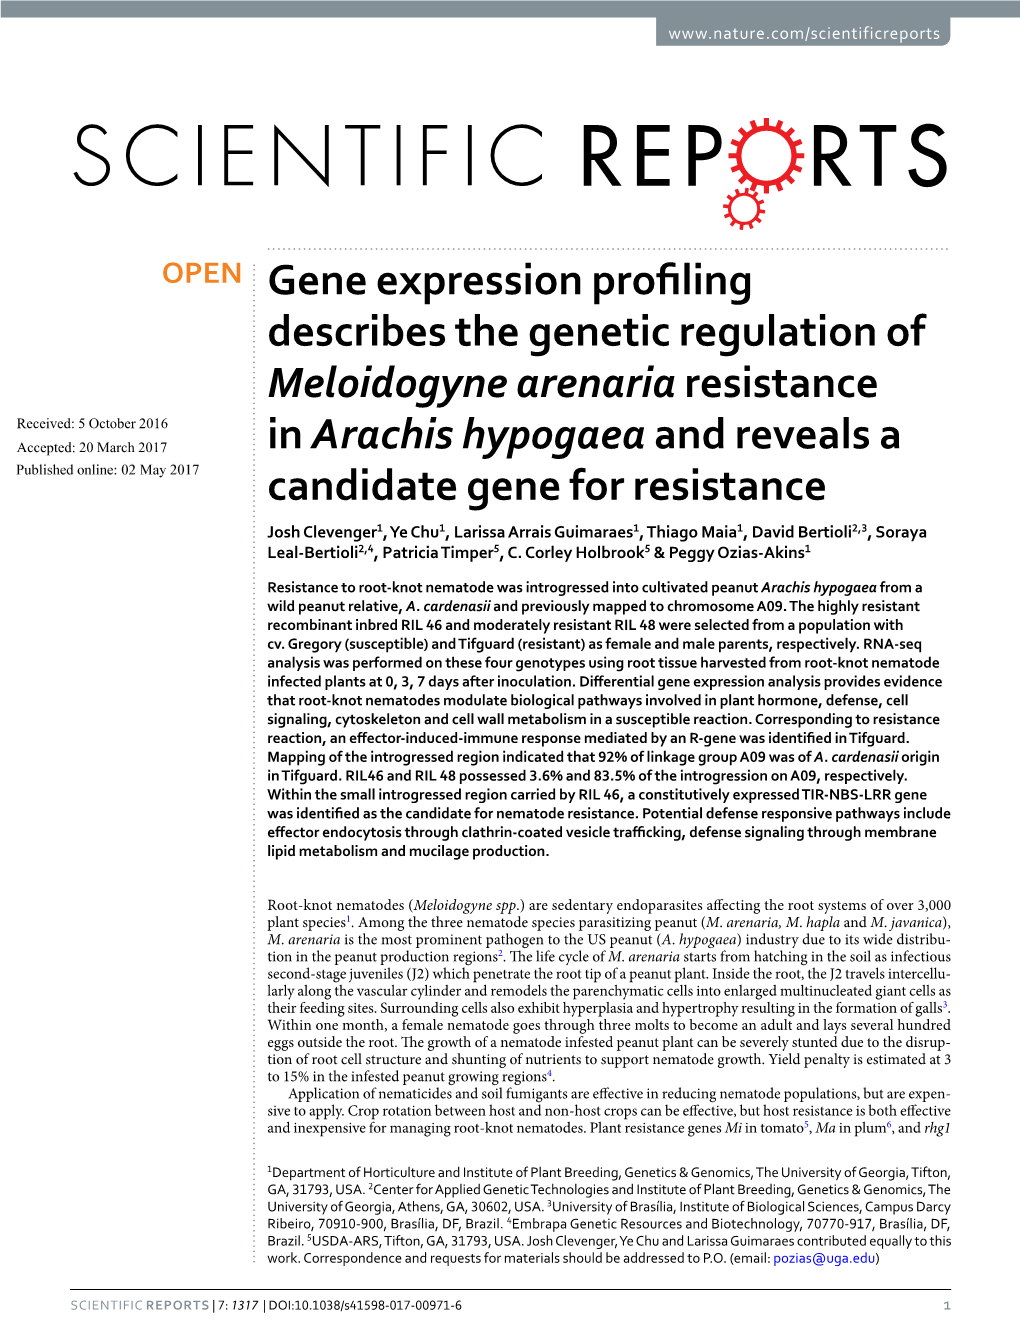 Gene Expression Profiling Describes the Genetic Regulation Of